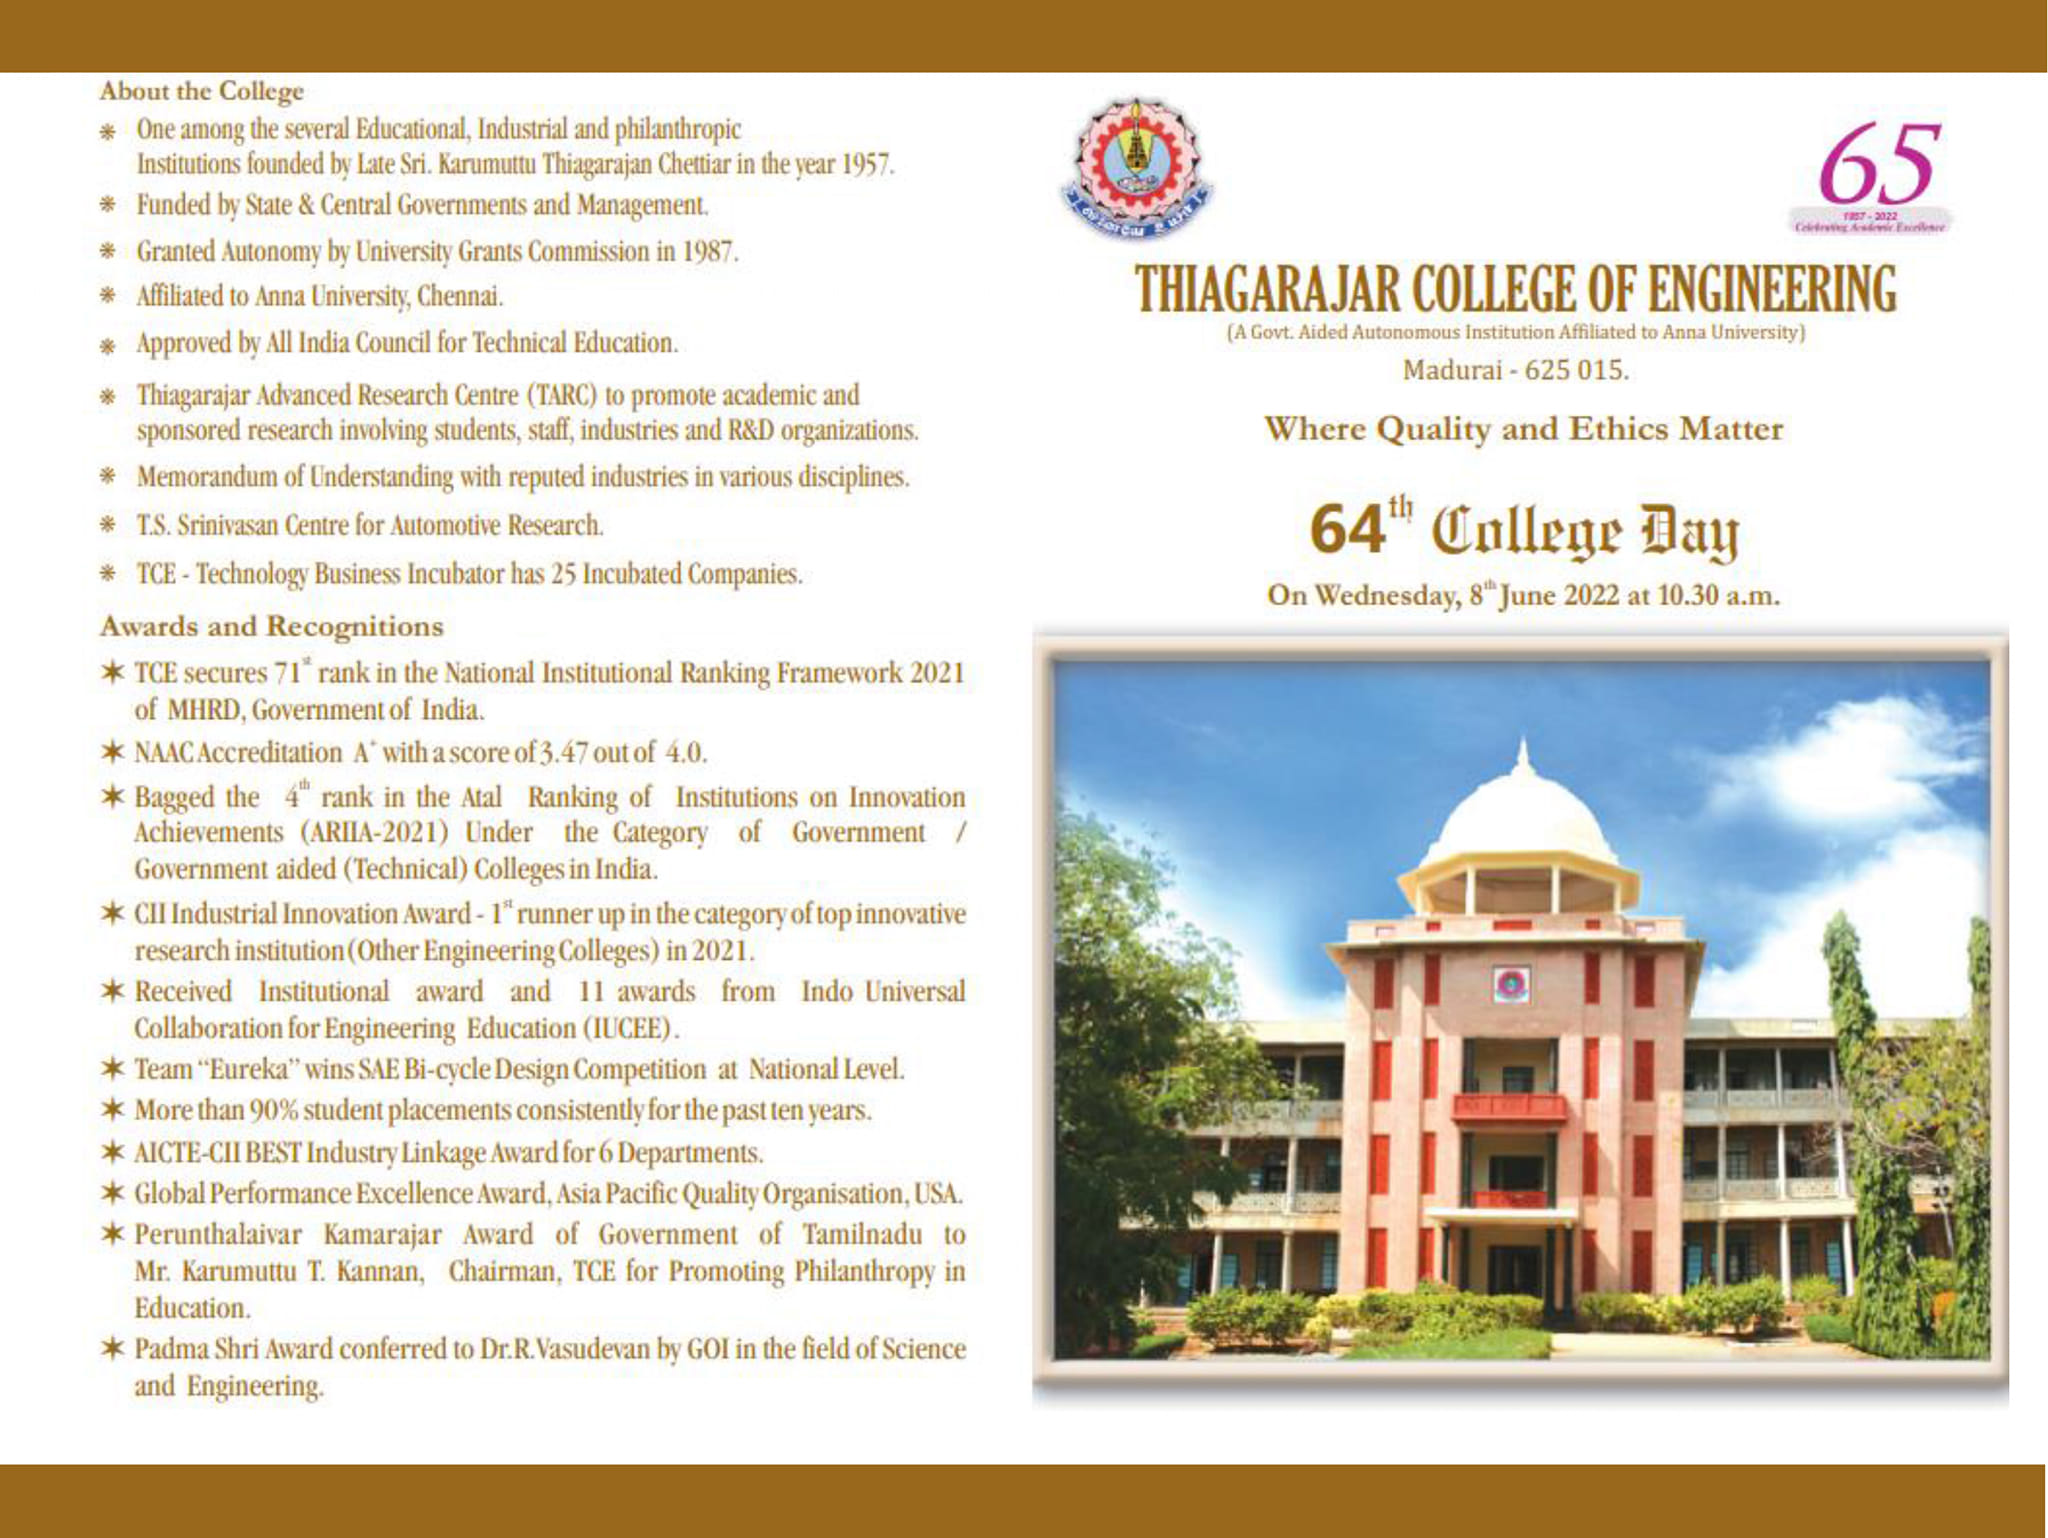 64th College Day